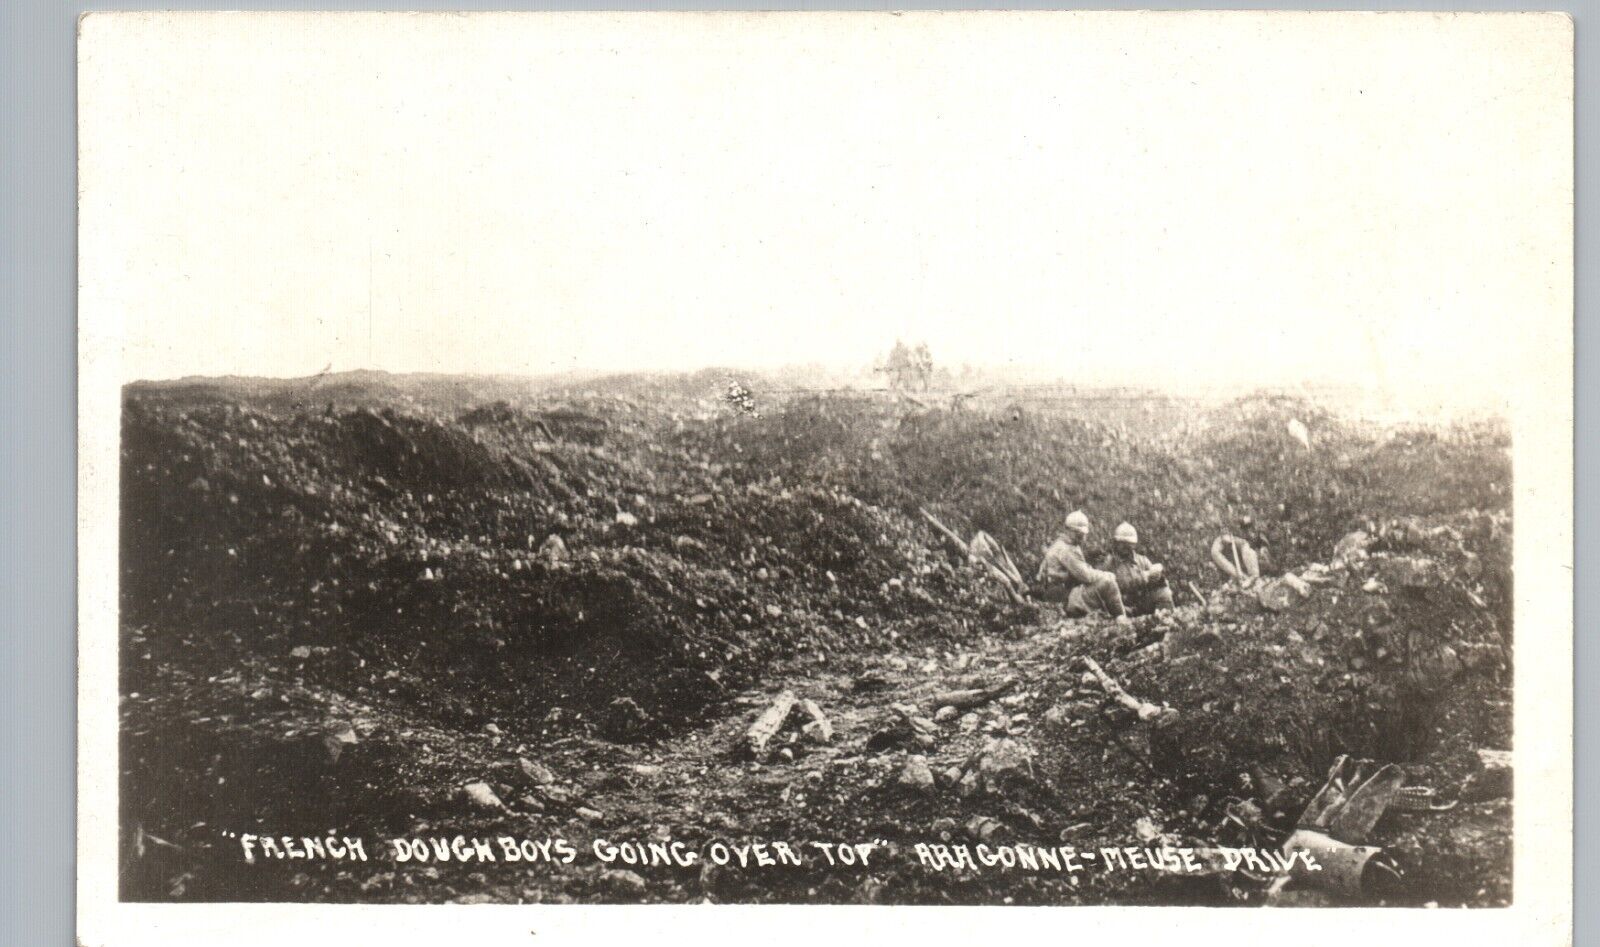 WW1 TRENCH WAR BATTLE argonne-meuse real photo postcard rppc french doughboys